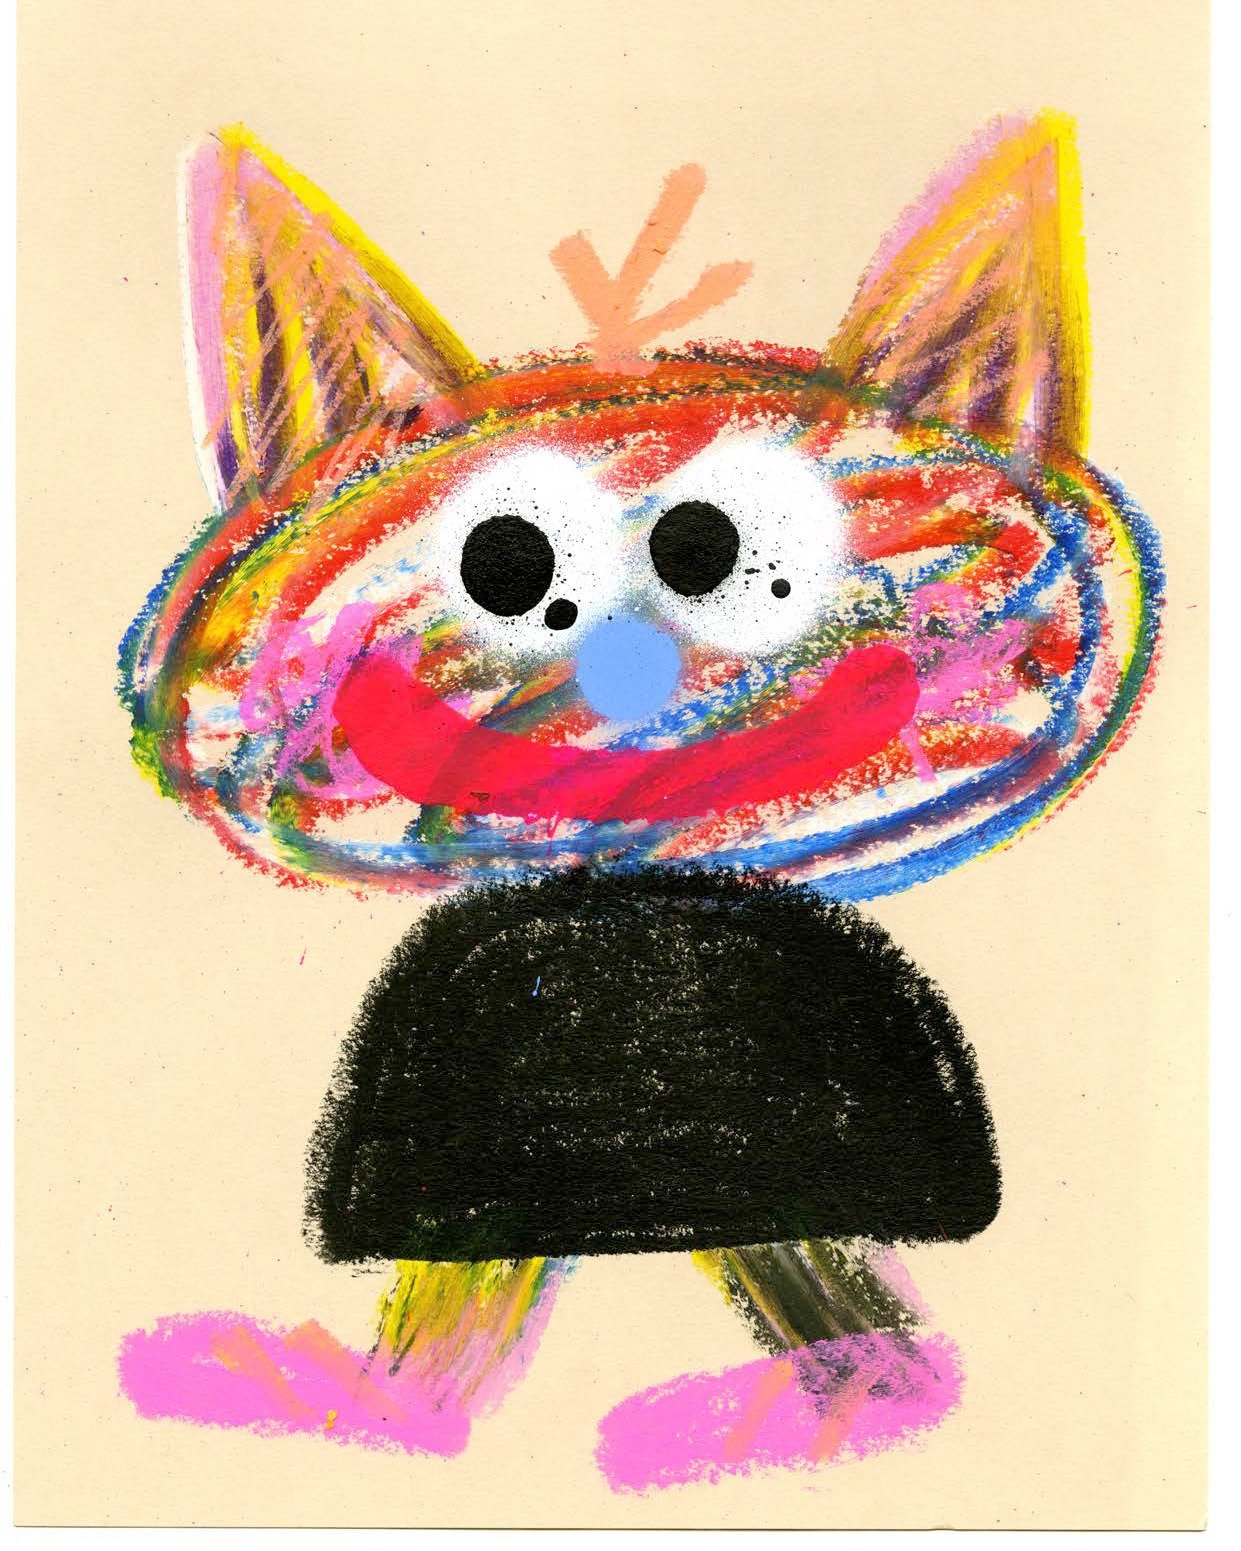 Check out this beautiful artwork by @jonburgerman ,  available at our website! (Link in Bio)

Scribber 2
Oil pastels on paper
29 x 22.5 cm
2022